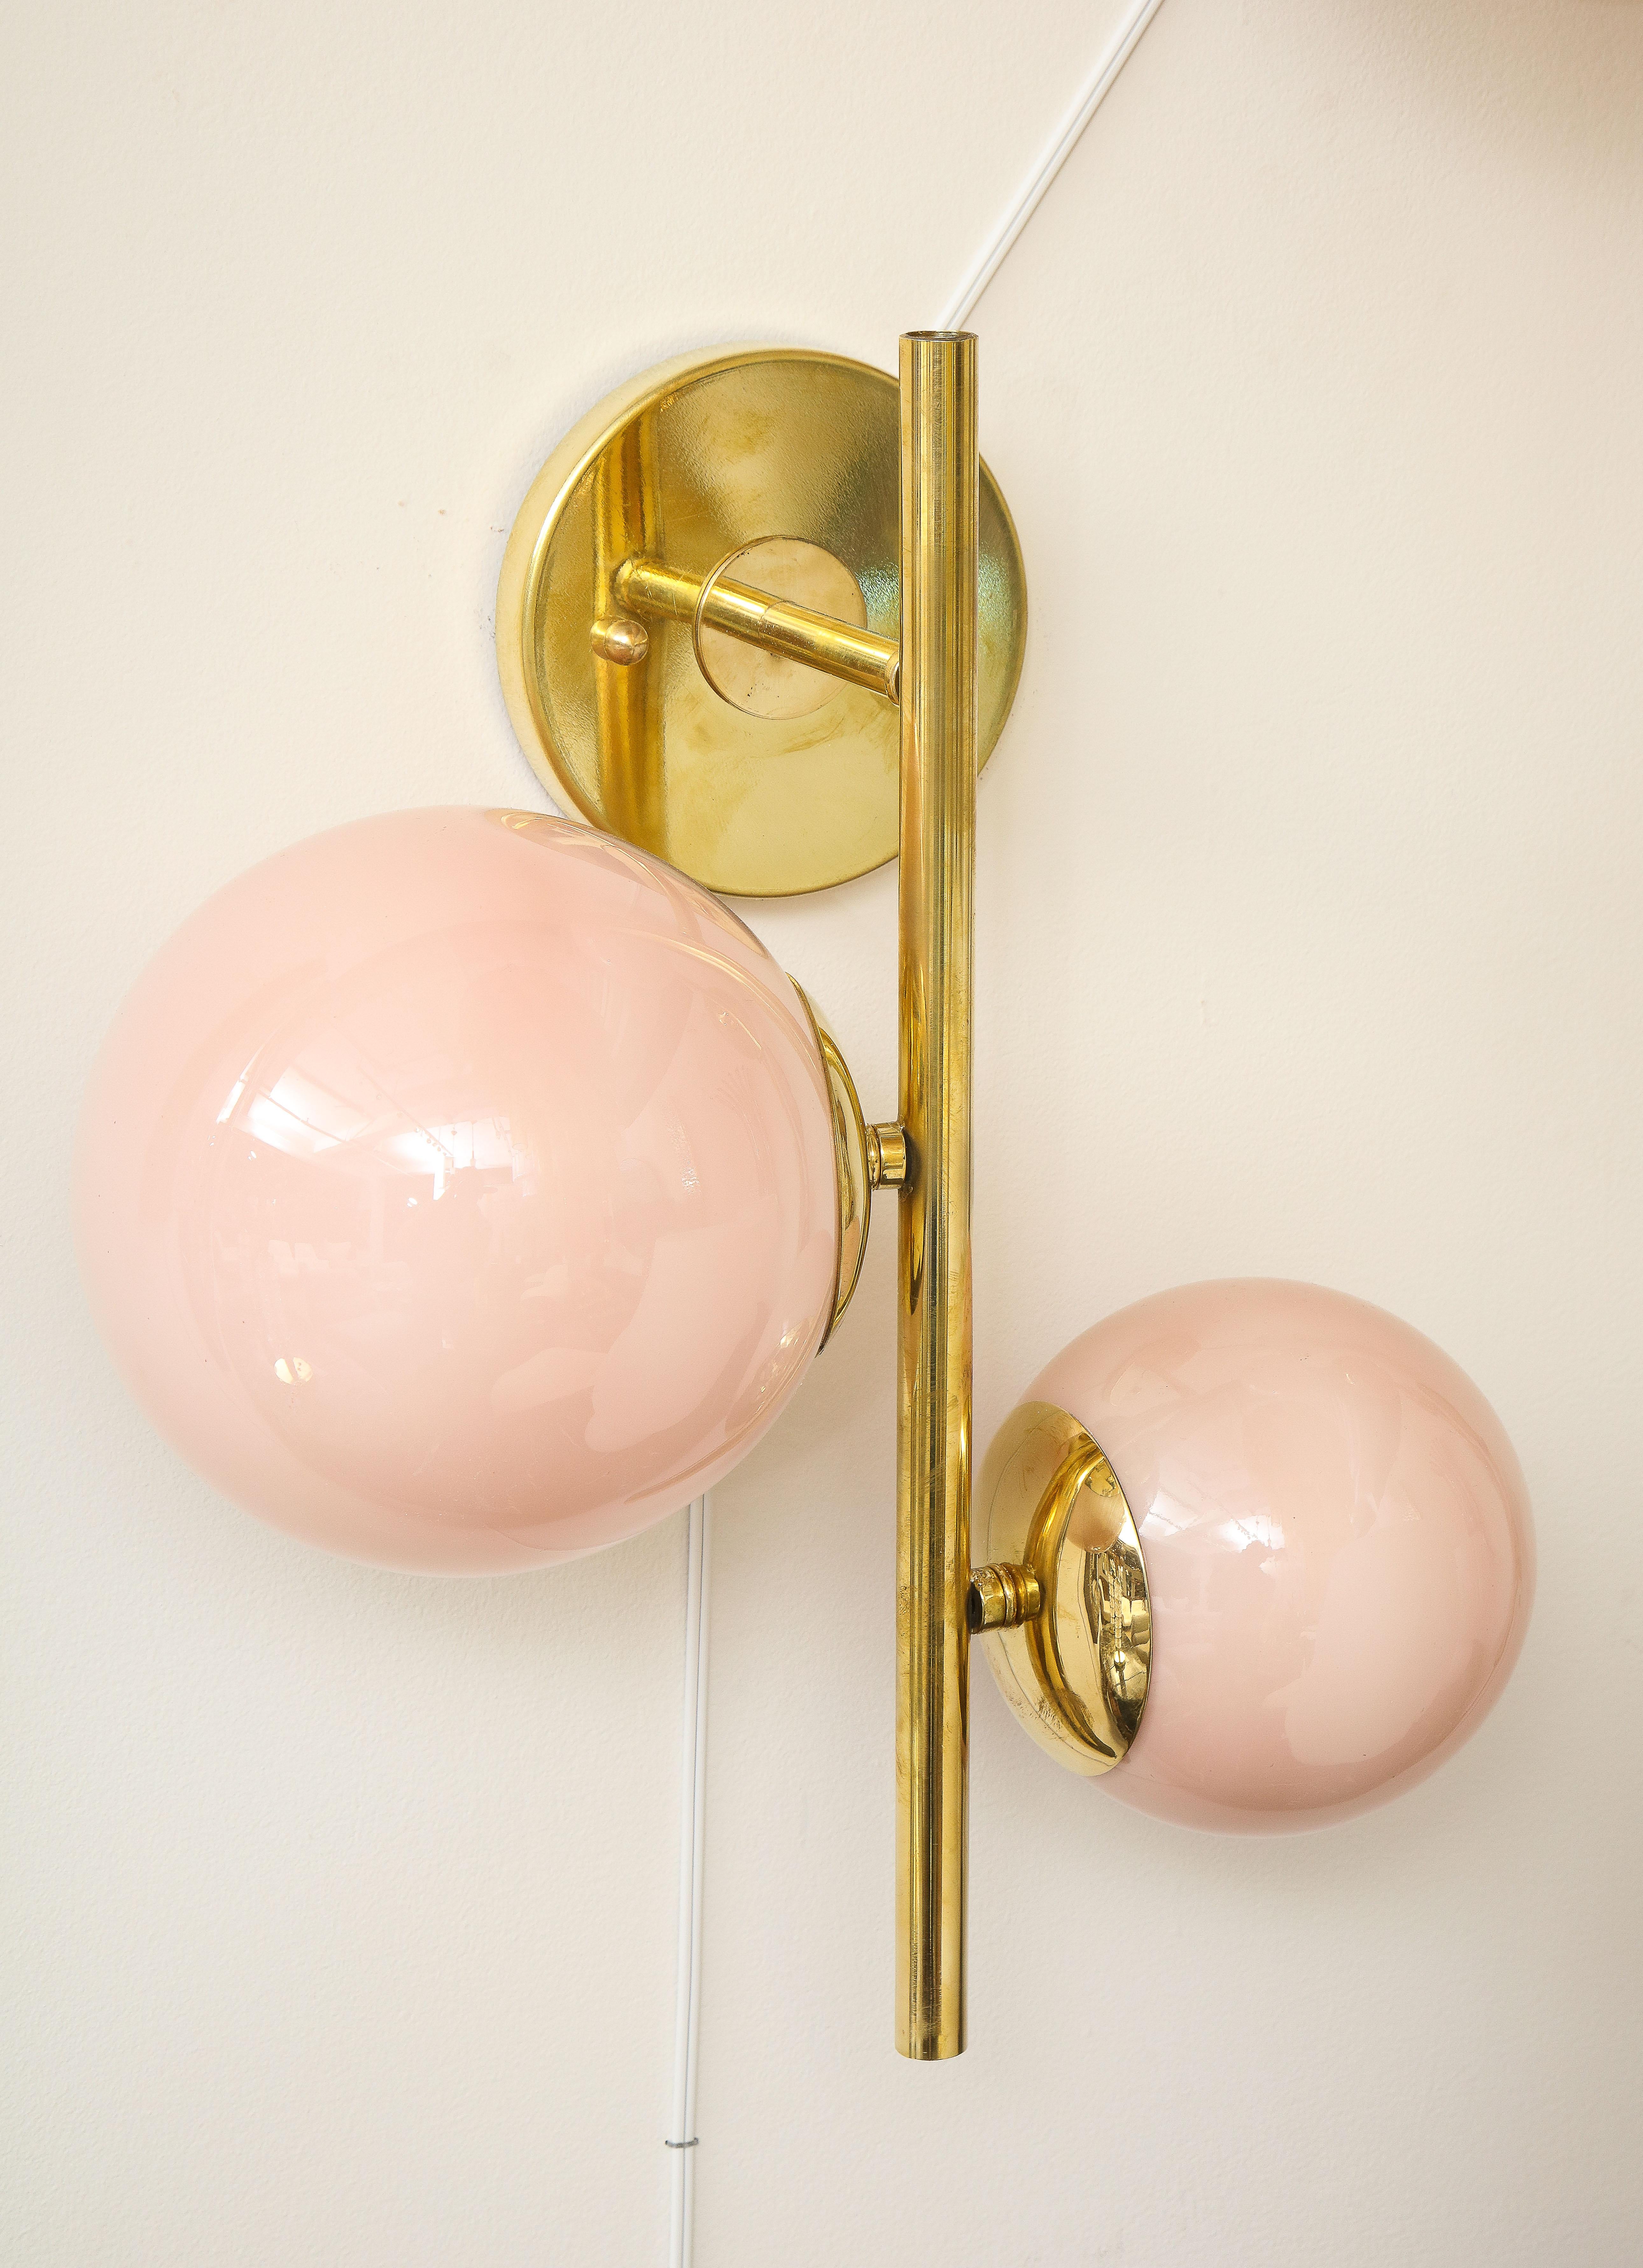 Pair of blush Pink Murano glass globes and brass sconces handcrafted in Italy, 2022. Clean lines describe this pair of linear sconces, consisting of two (2) translucent blush pink glass globes of differing diameters at different heights attached to